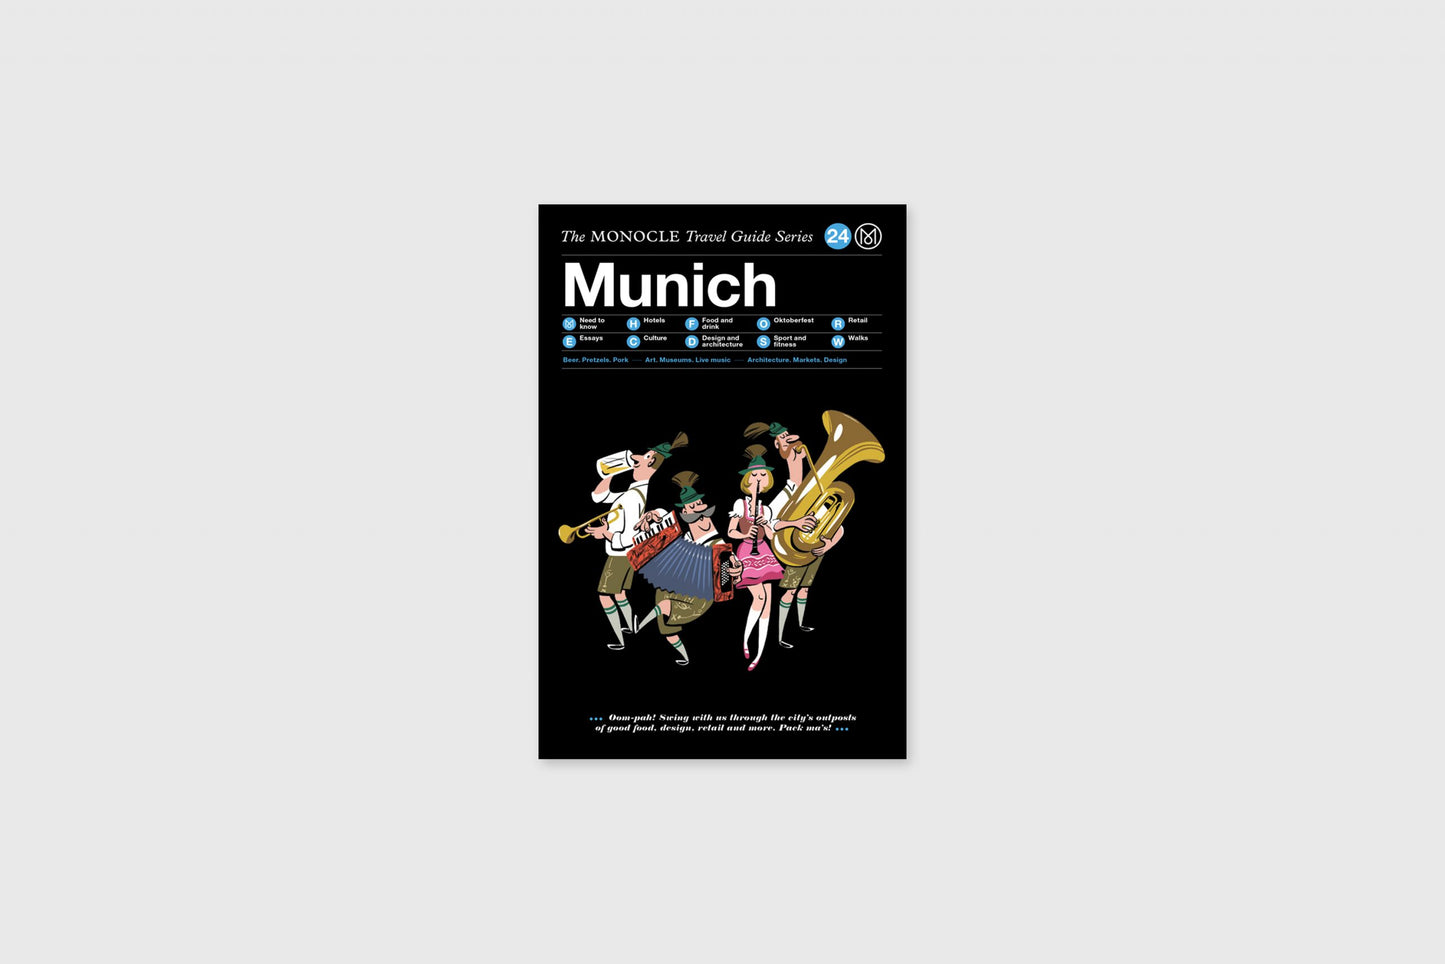 Munich: The Monocle Travel Guide Series